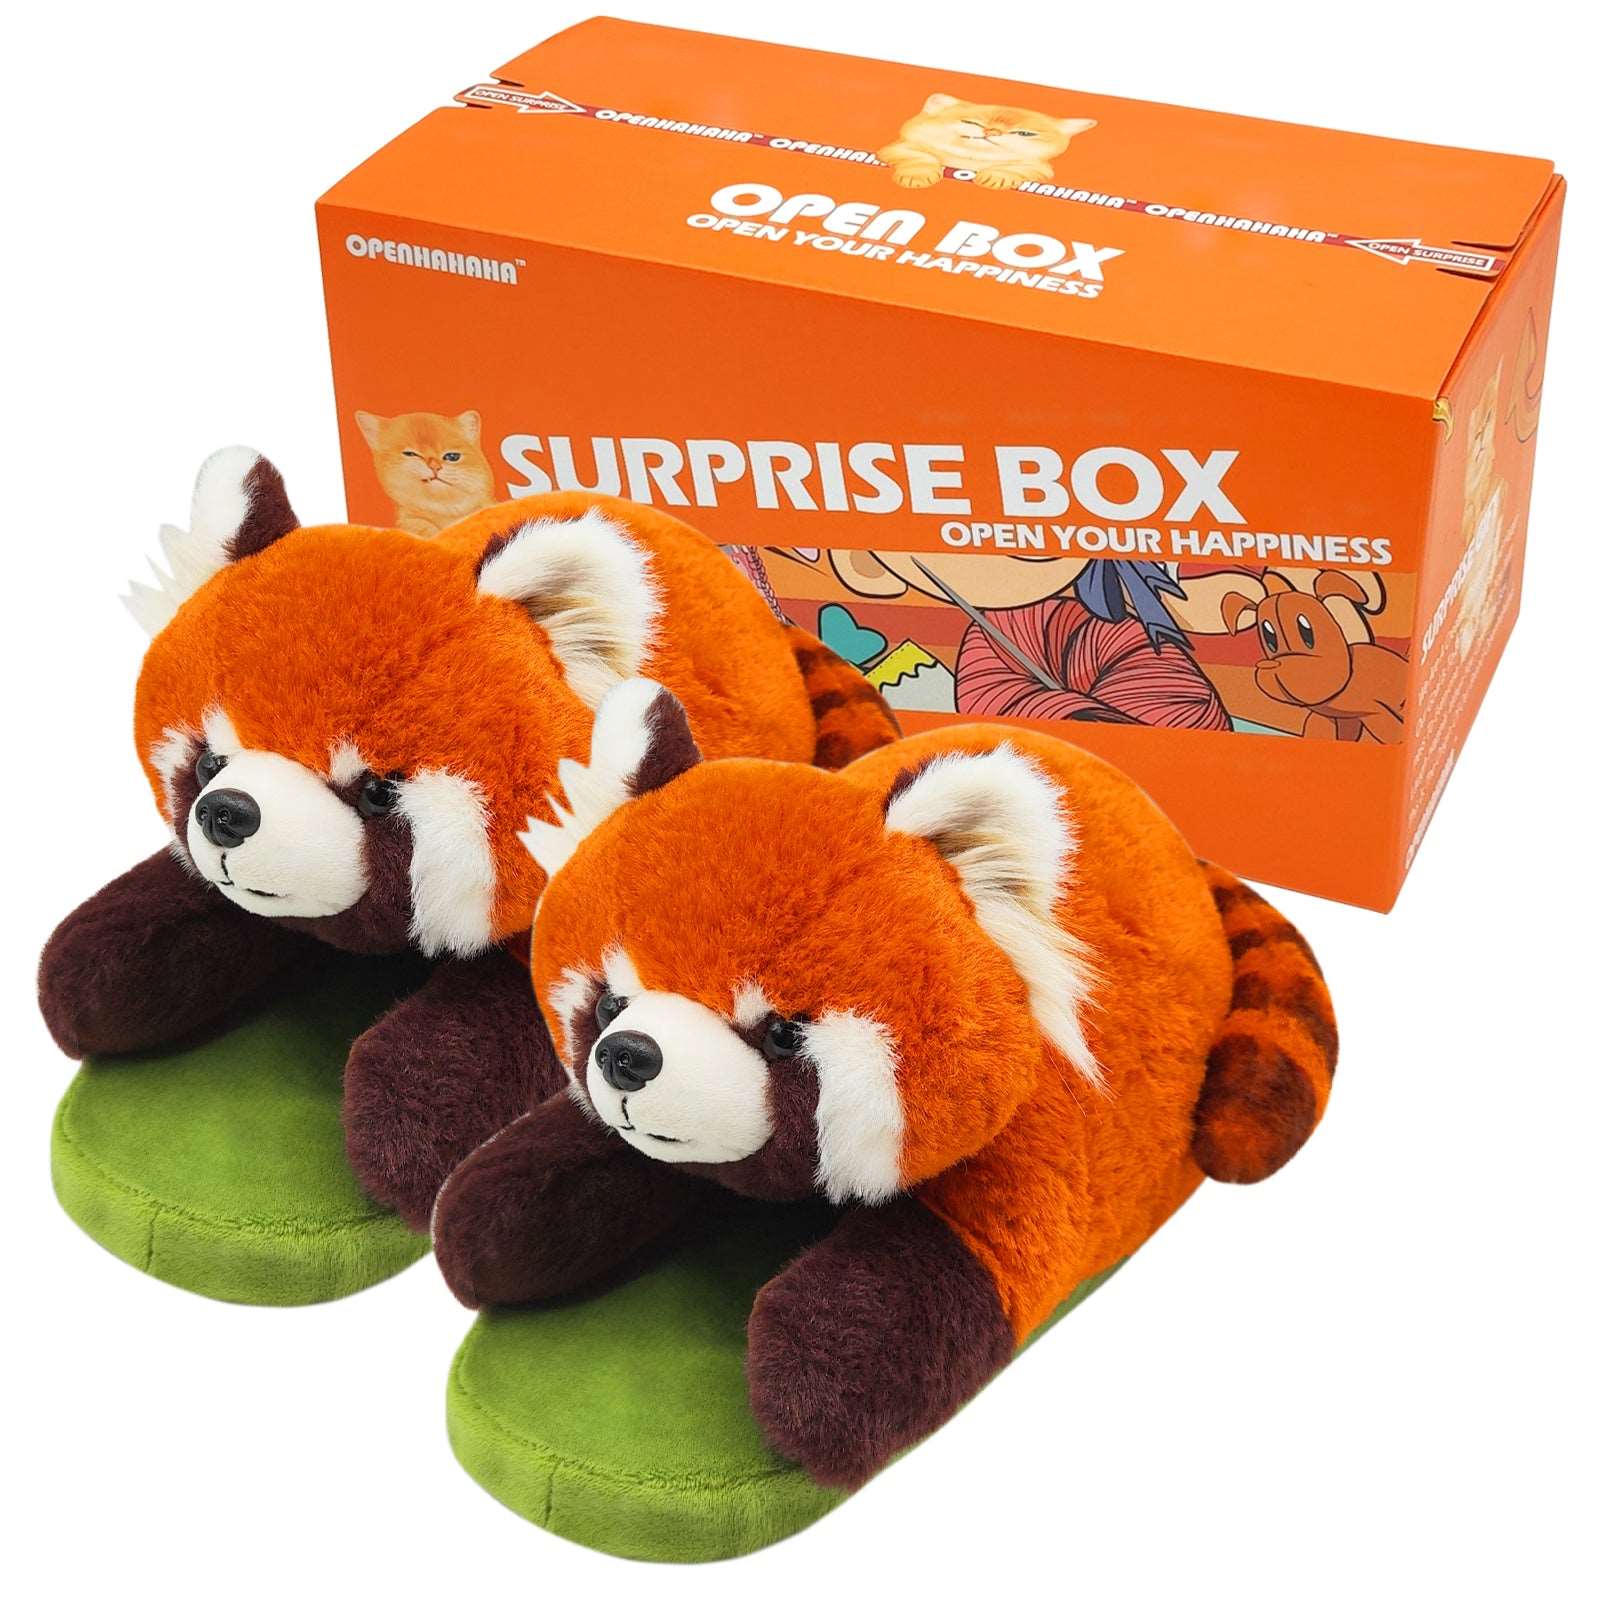 Red panda slippers and gift box